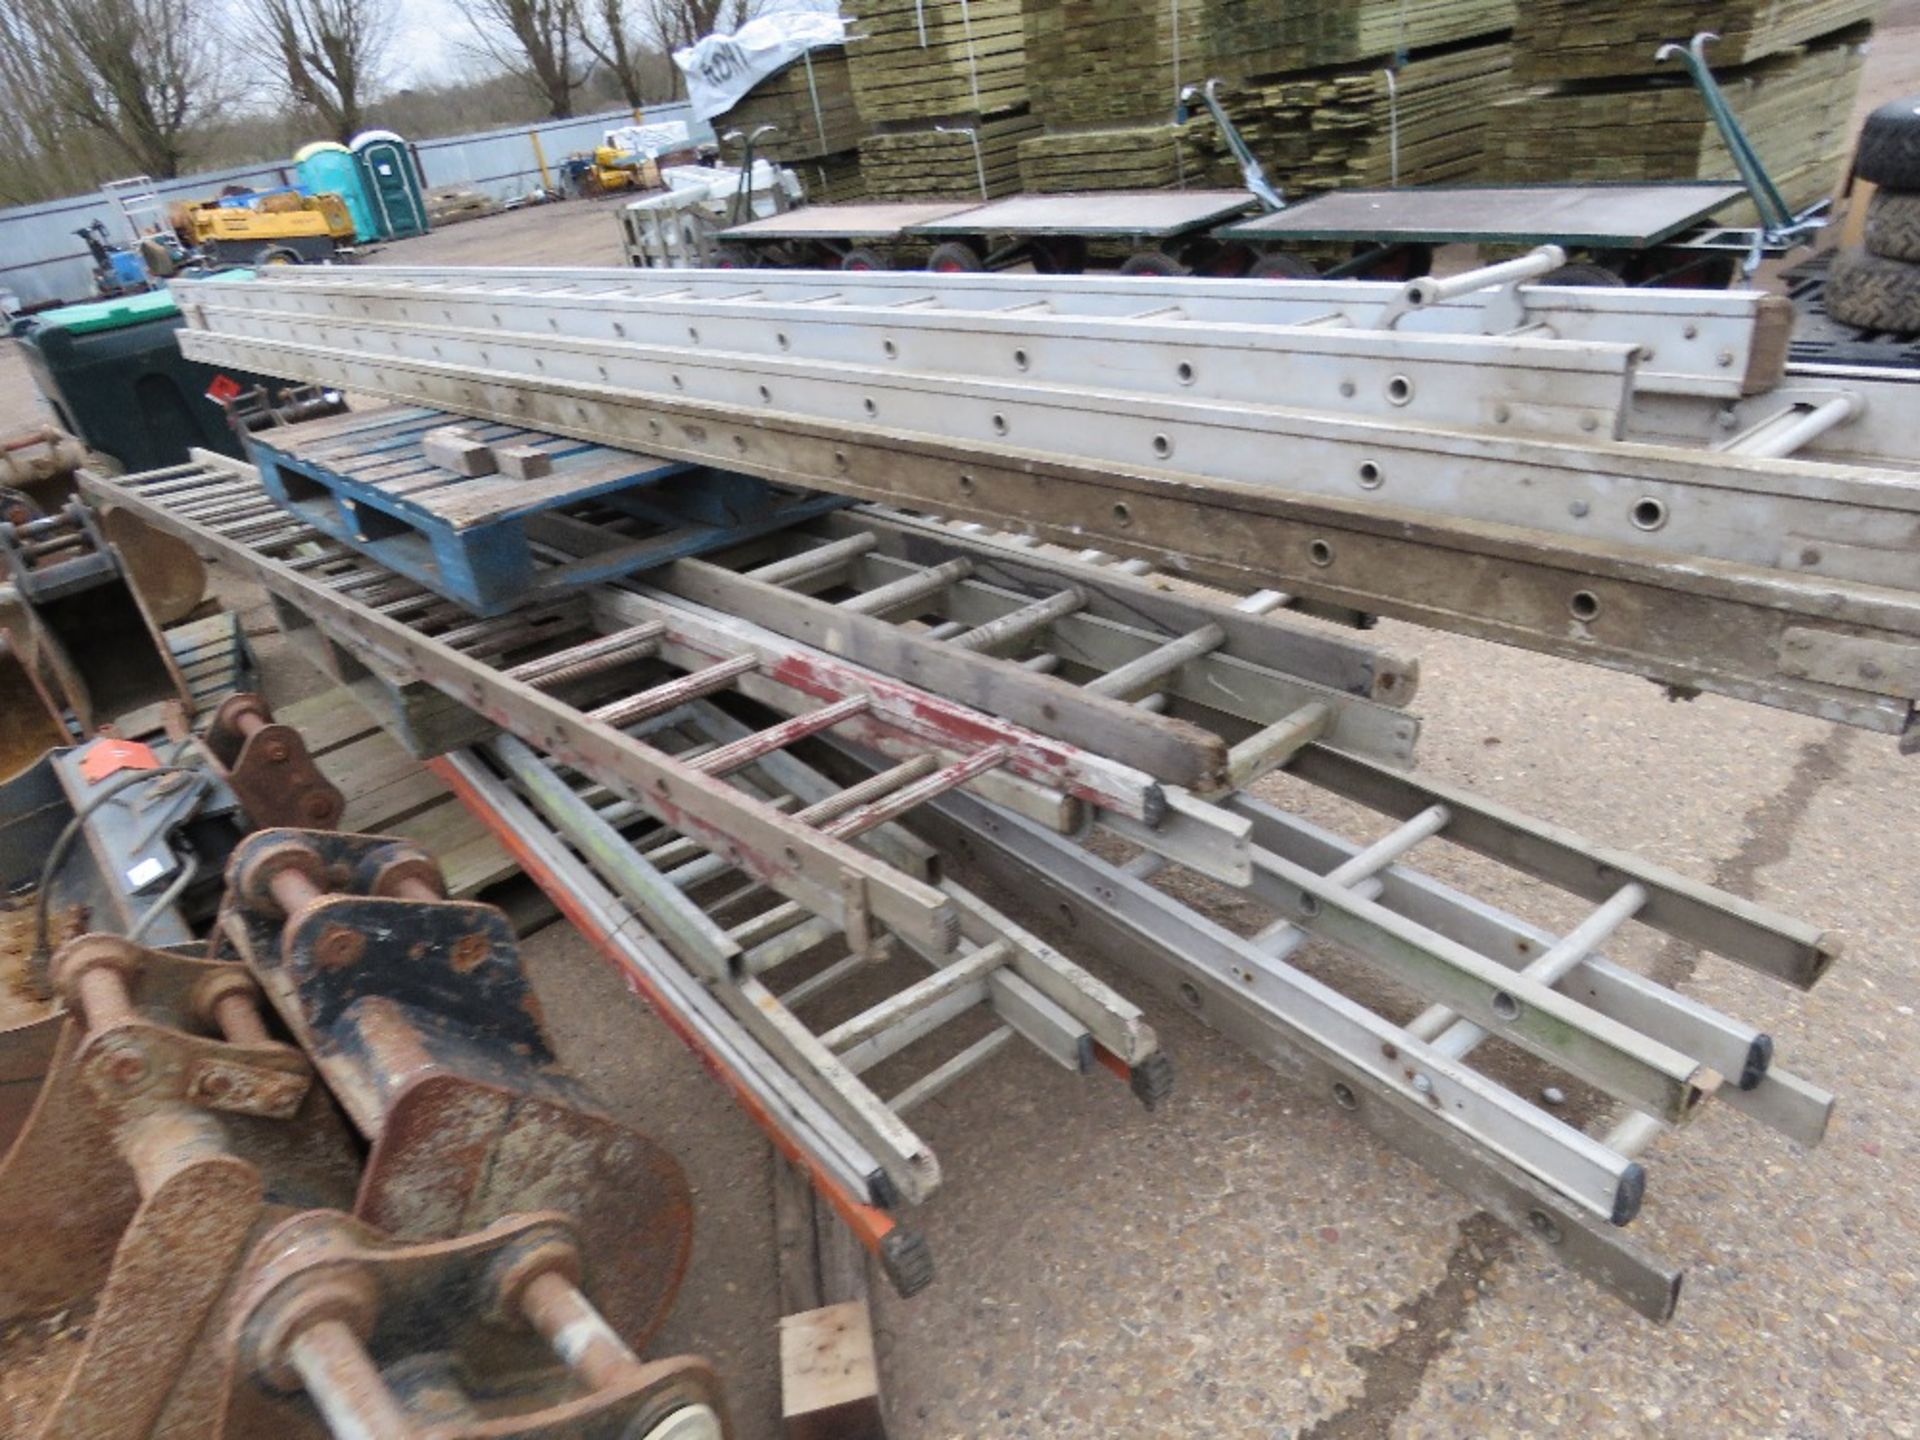 STACK OF ASSORTED LADDERS/LADDER SECTIONS, INCLUDING LARGE TRIPLE STAGE ALI LADDER. - Image 3 of 4